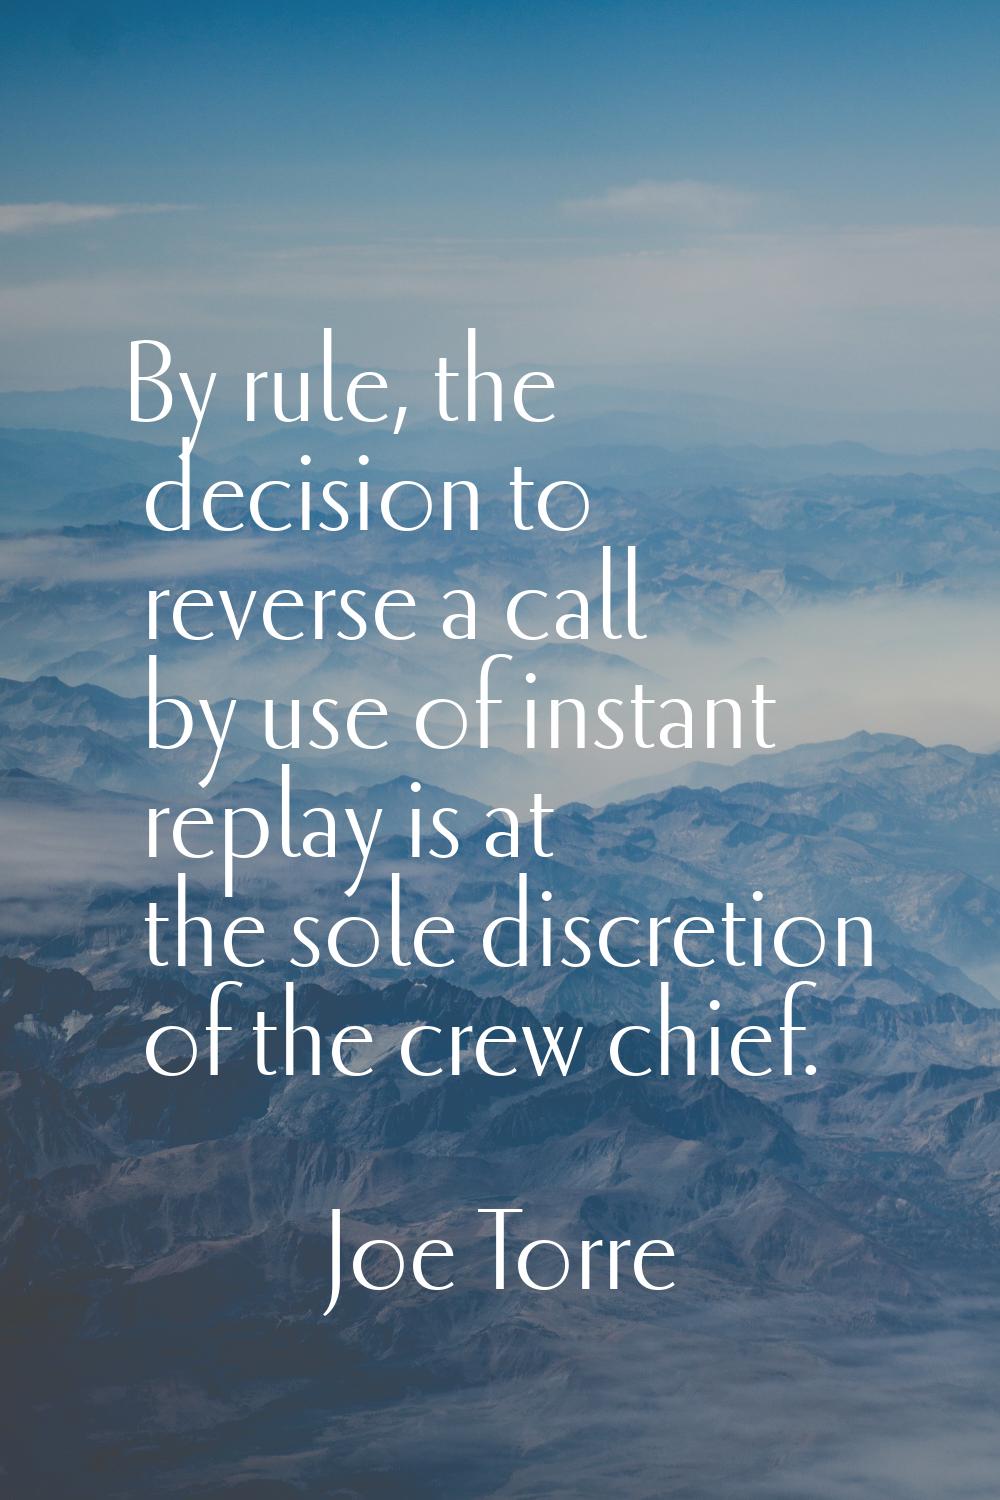 By rule, the decision to reverse a call by use of instant replay is at the sole discretion of the c